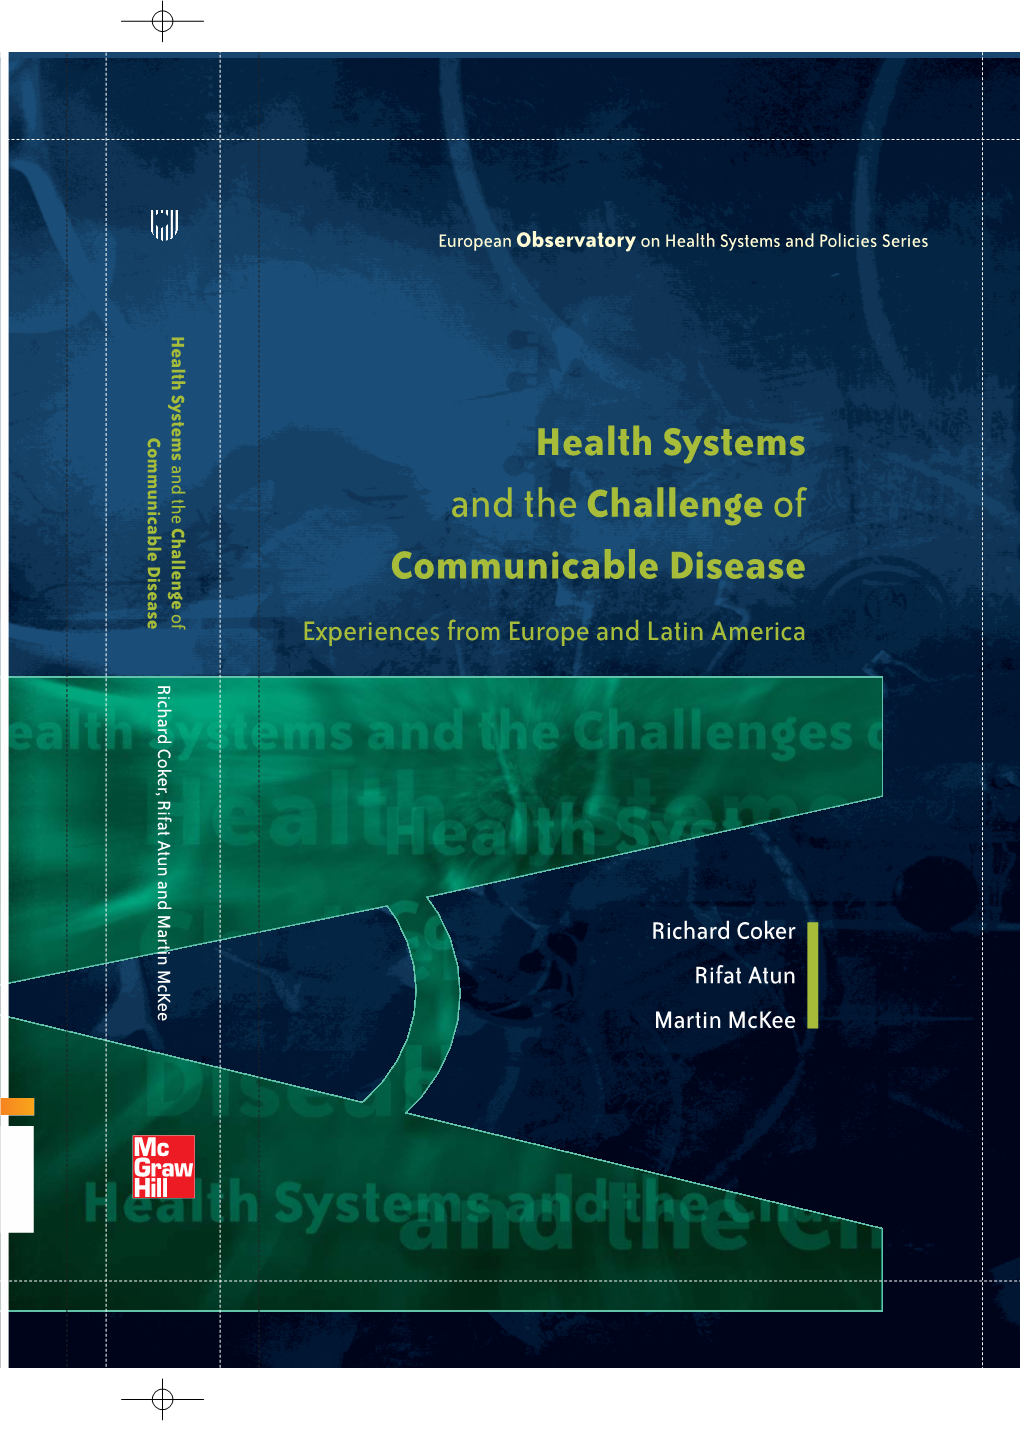 Health Systems and the Challenge of Communicable Diseases